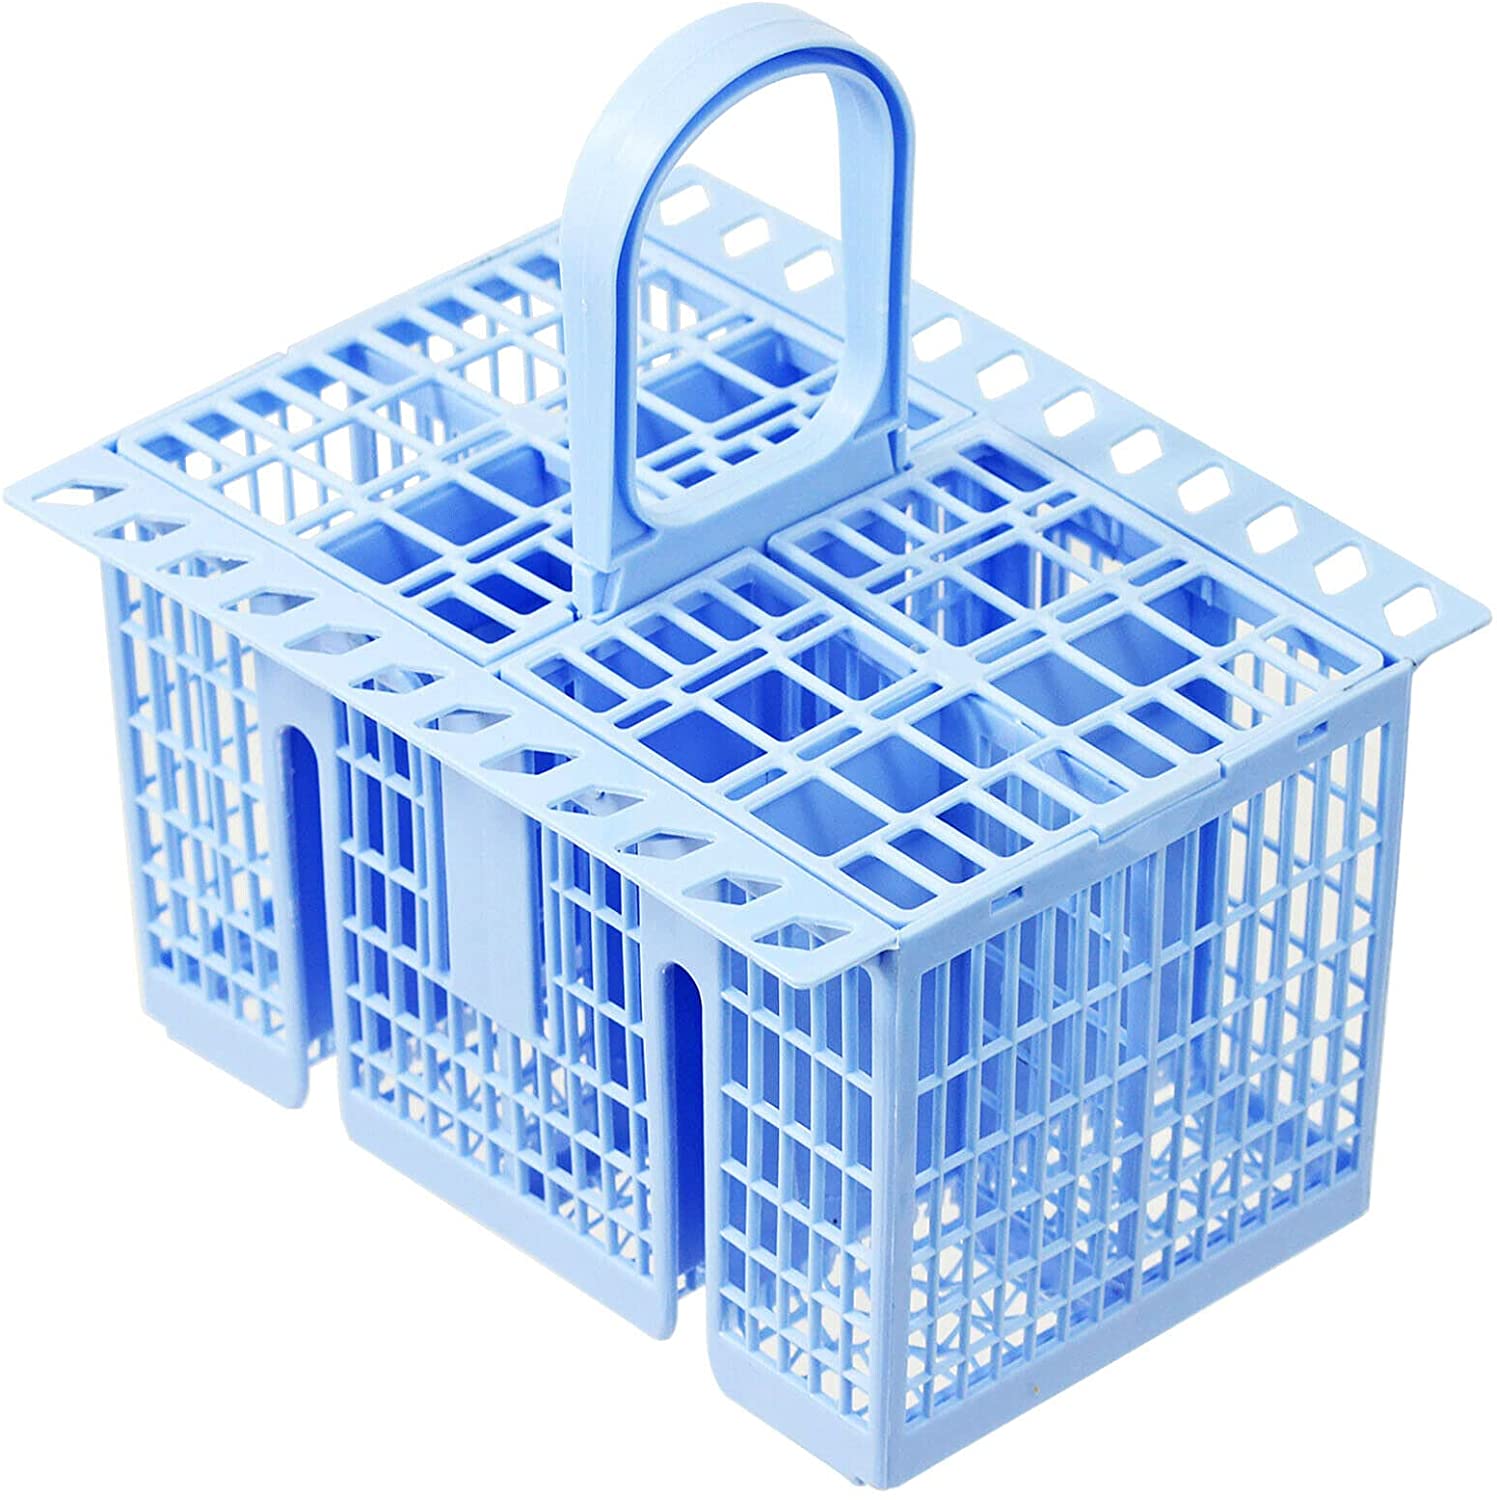 SPARES2GO Cutlery Basket compatible with John Lewis Dishwasher (Blue, 220 x 208 x 160mm)